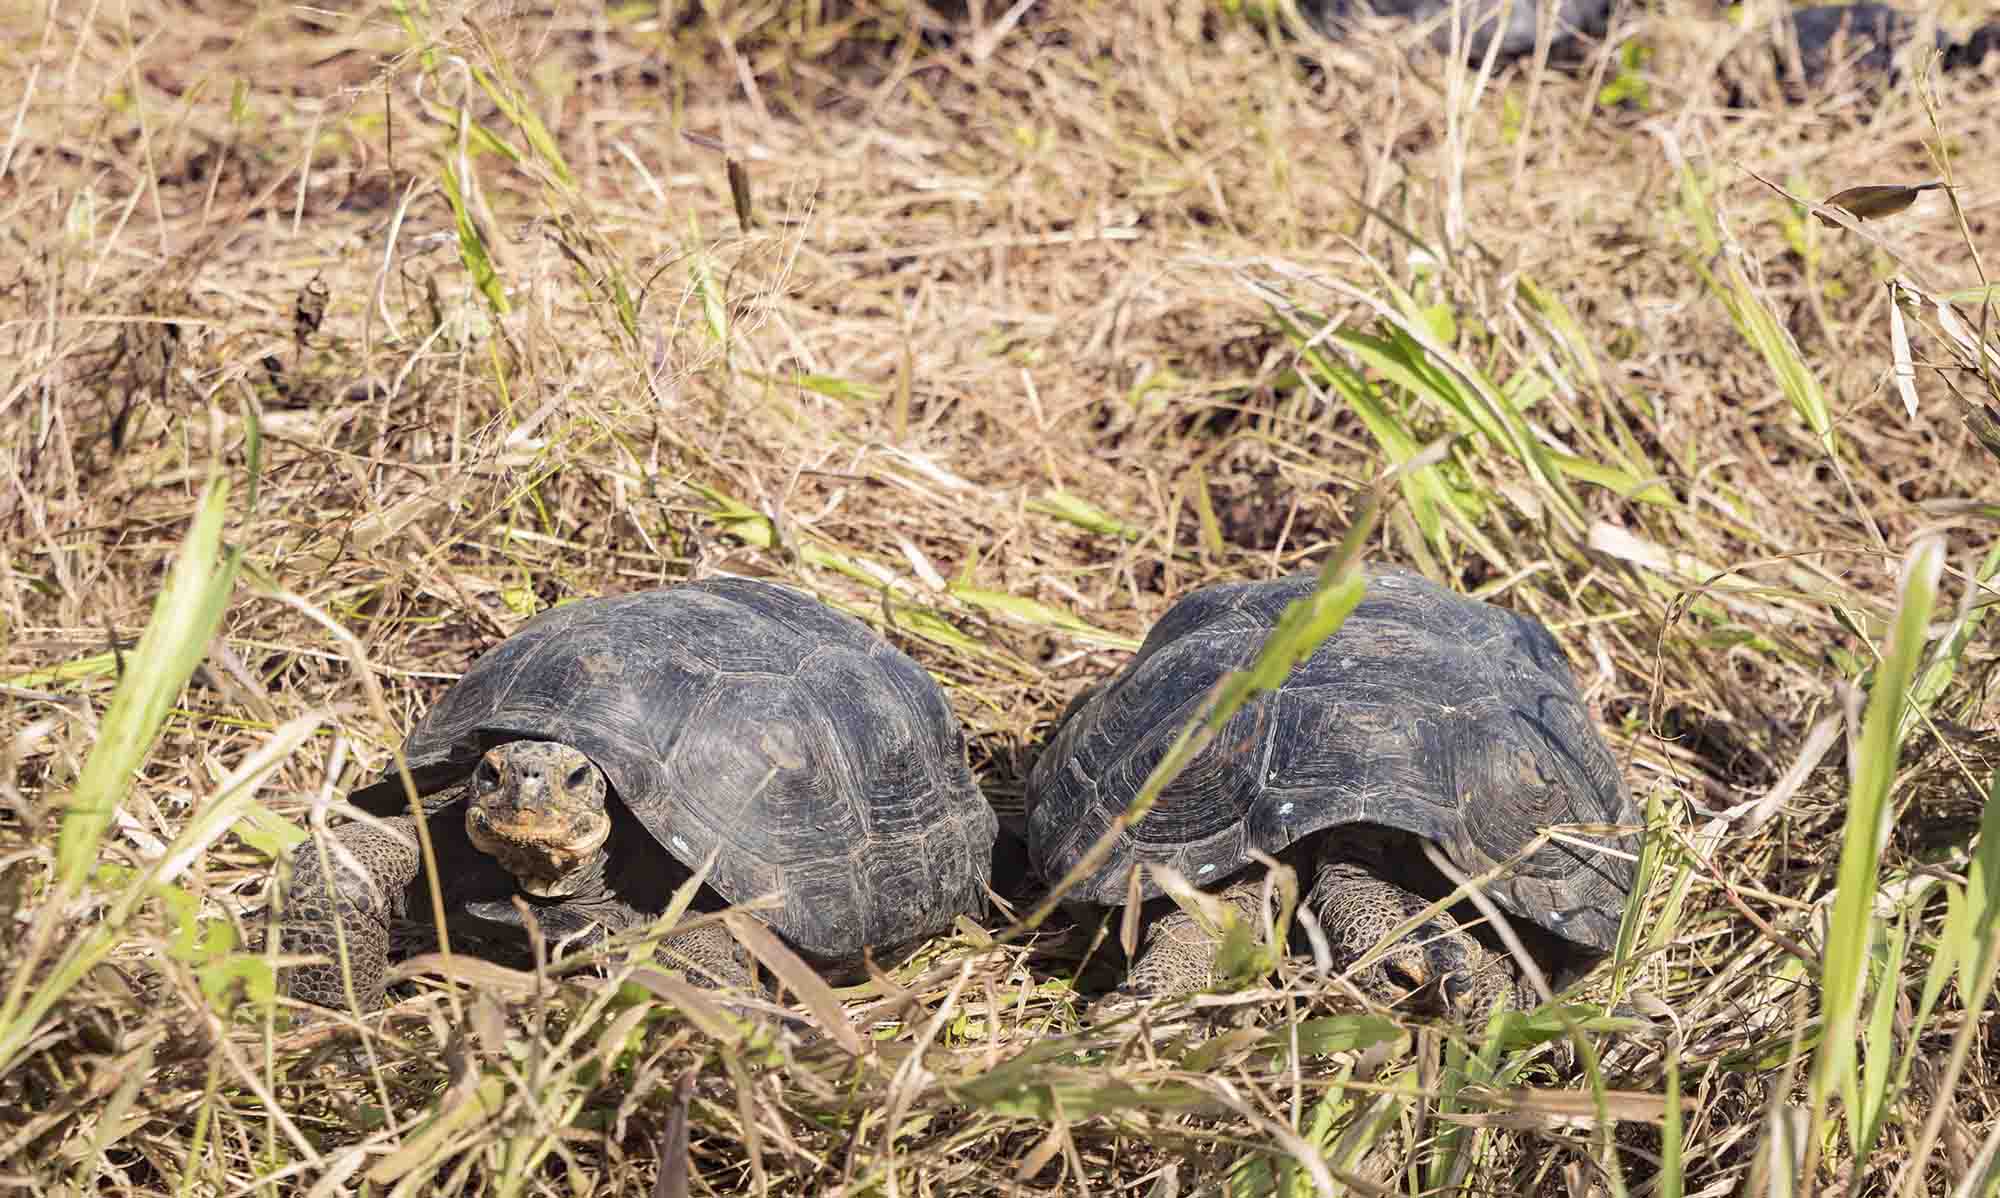 Conservation Win As 86 Giant Tortoises Introduced On Galapagos Island